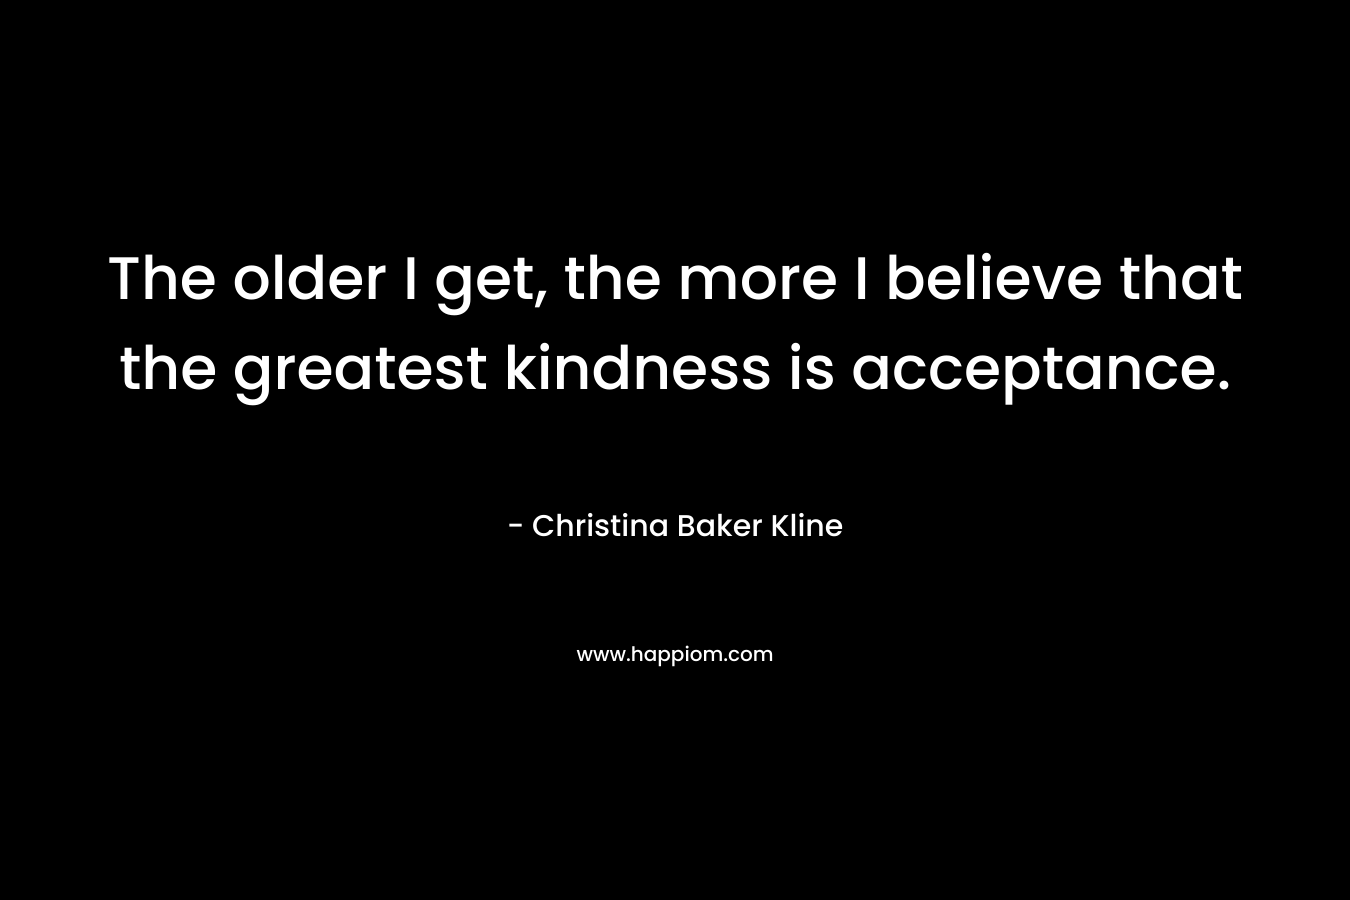 The older I get, the more I believe that the greatest kindness is acceptance.